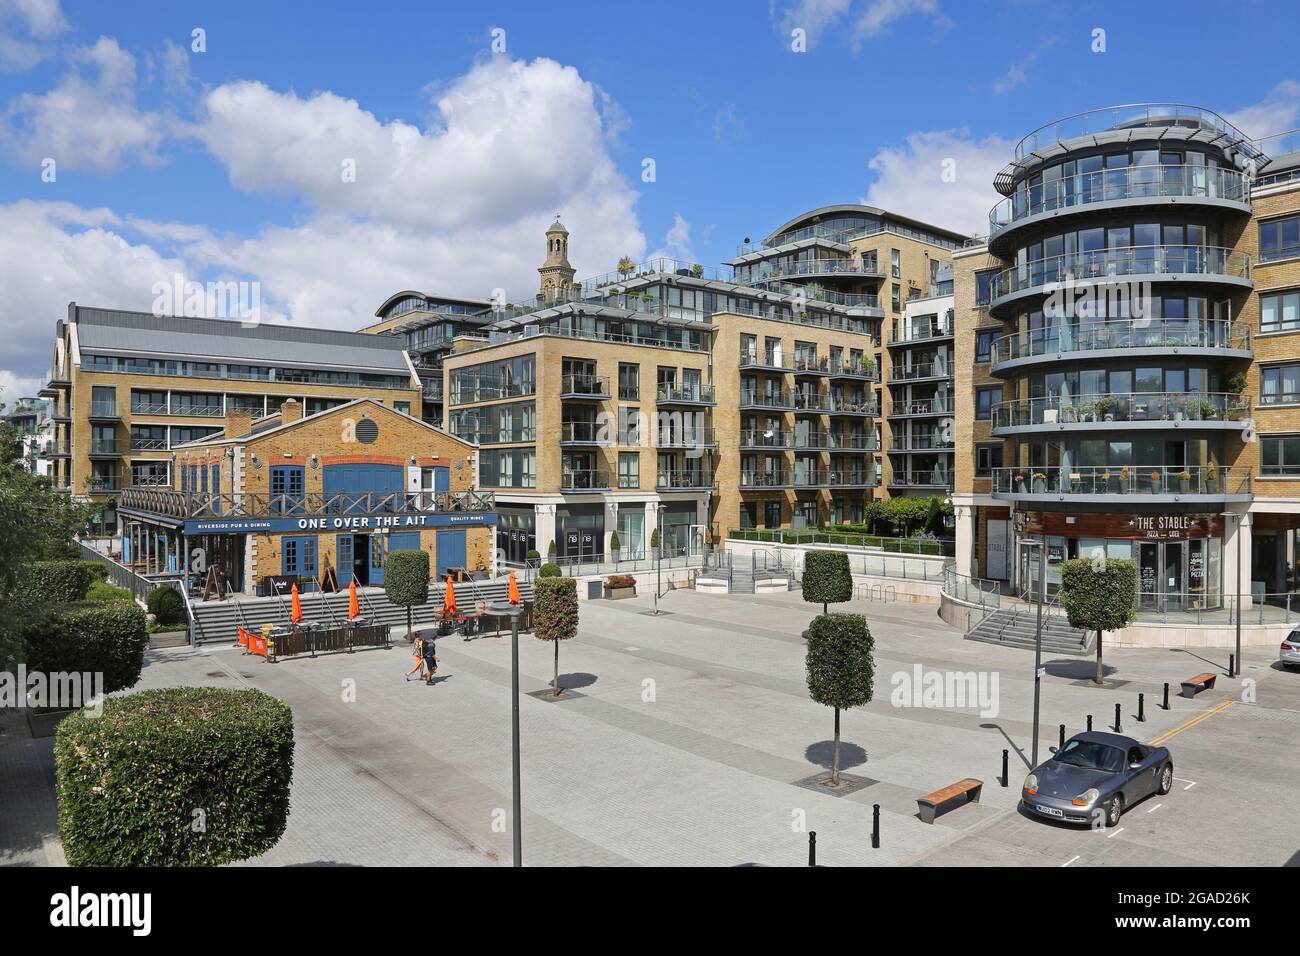 New riverside residential development at Kew Bridge, west London, by the River Thames. Shows One Over The Ait cafe/bar with apartment blocks beyond. Stock Photo